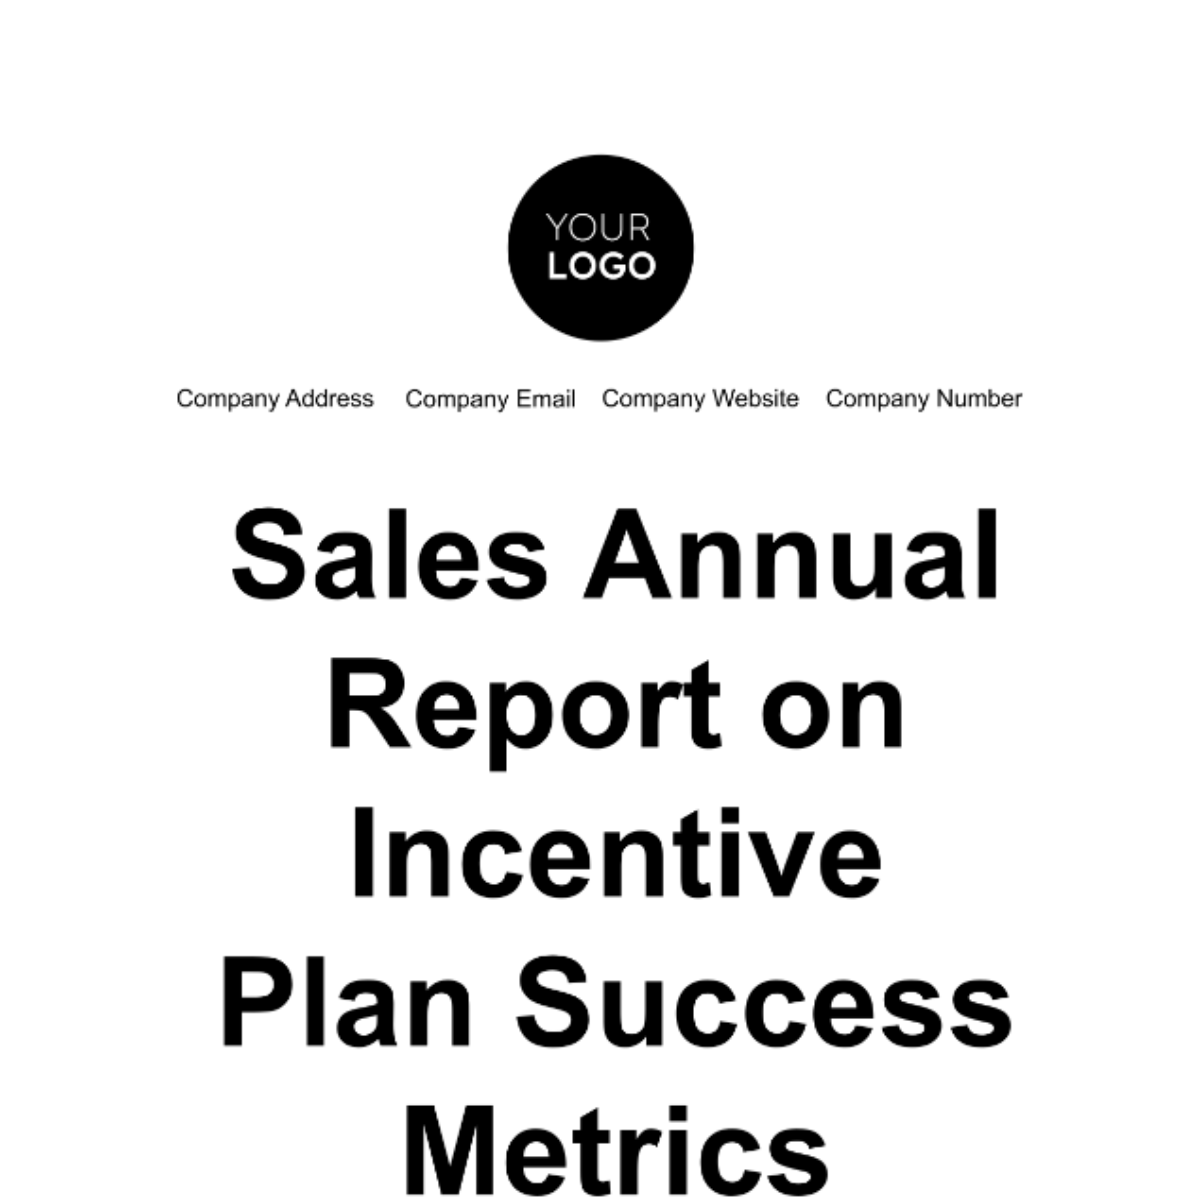 Free Sales Annual Report on Incentive Plan Success Metrics Template